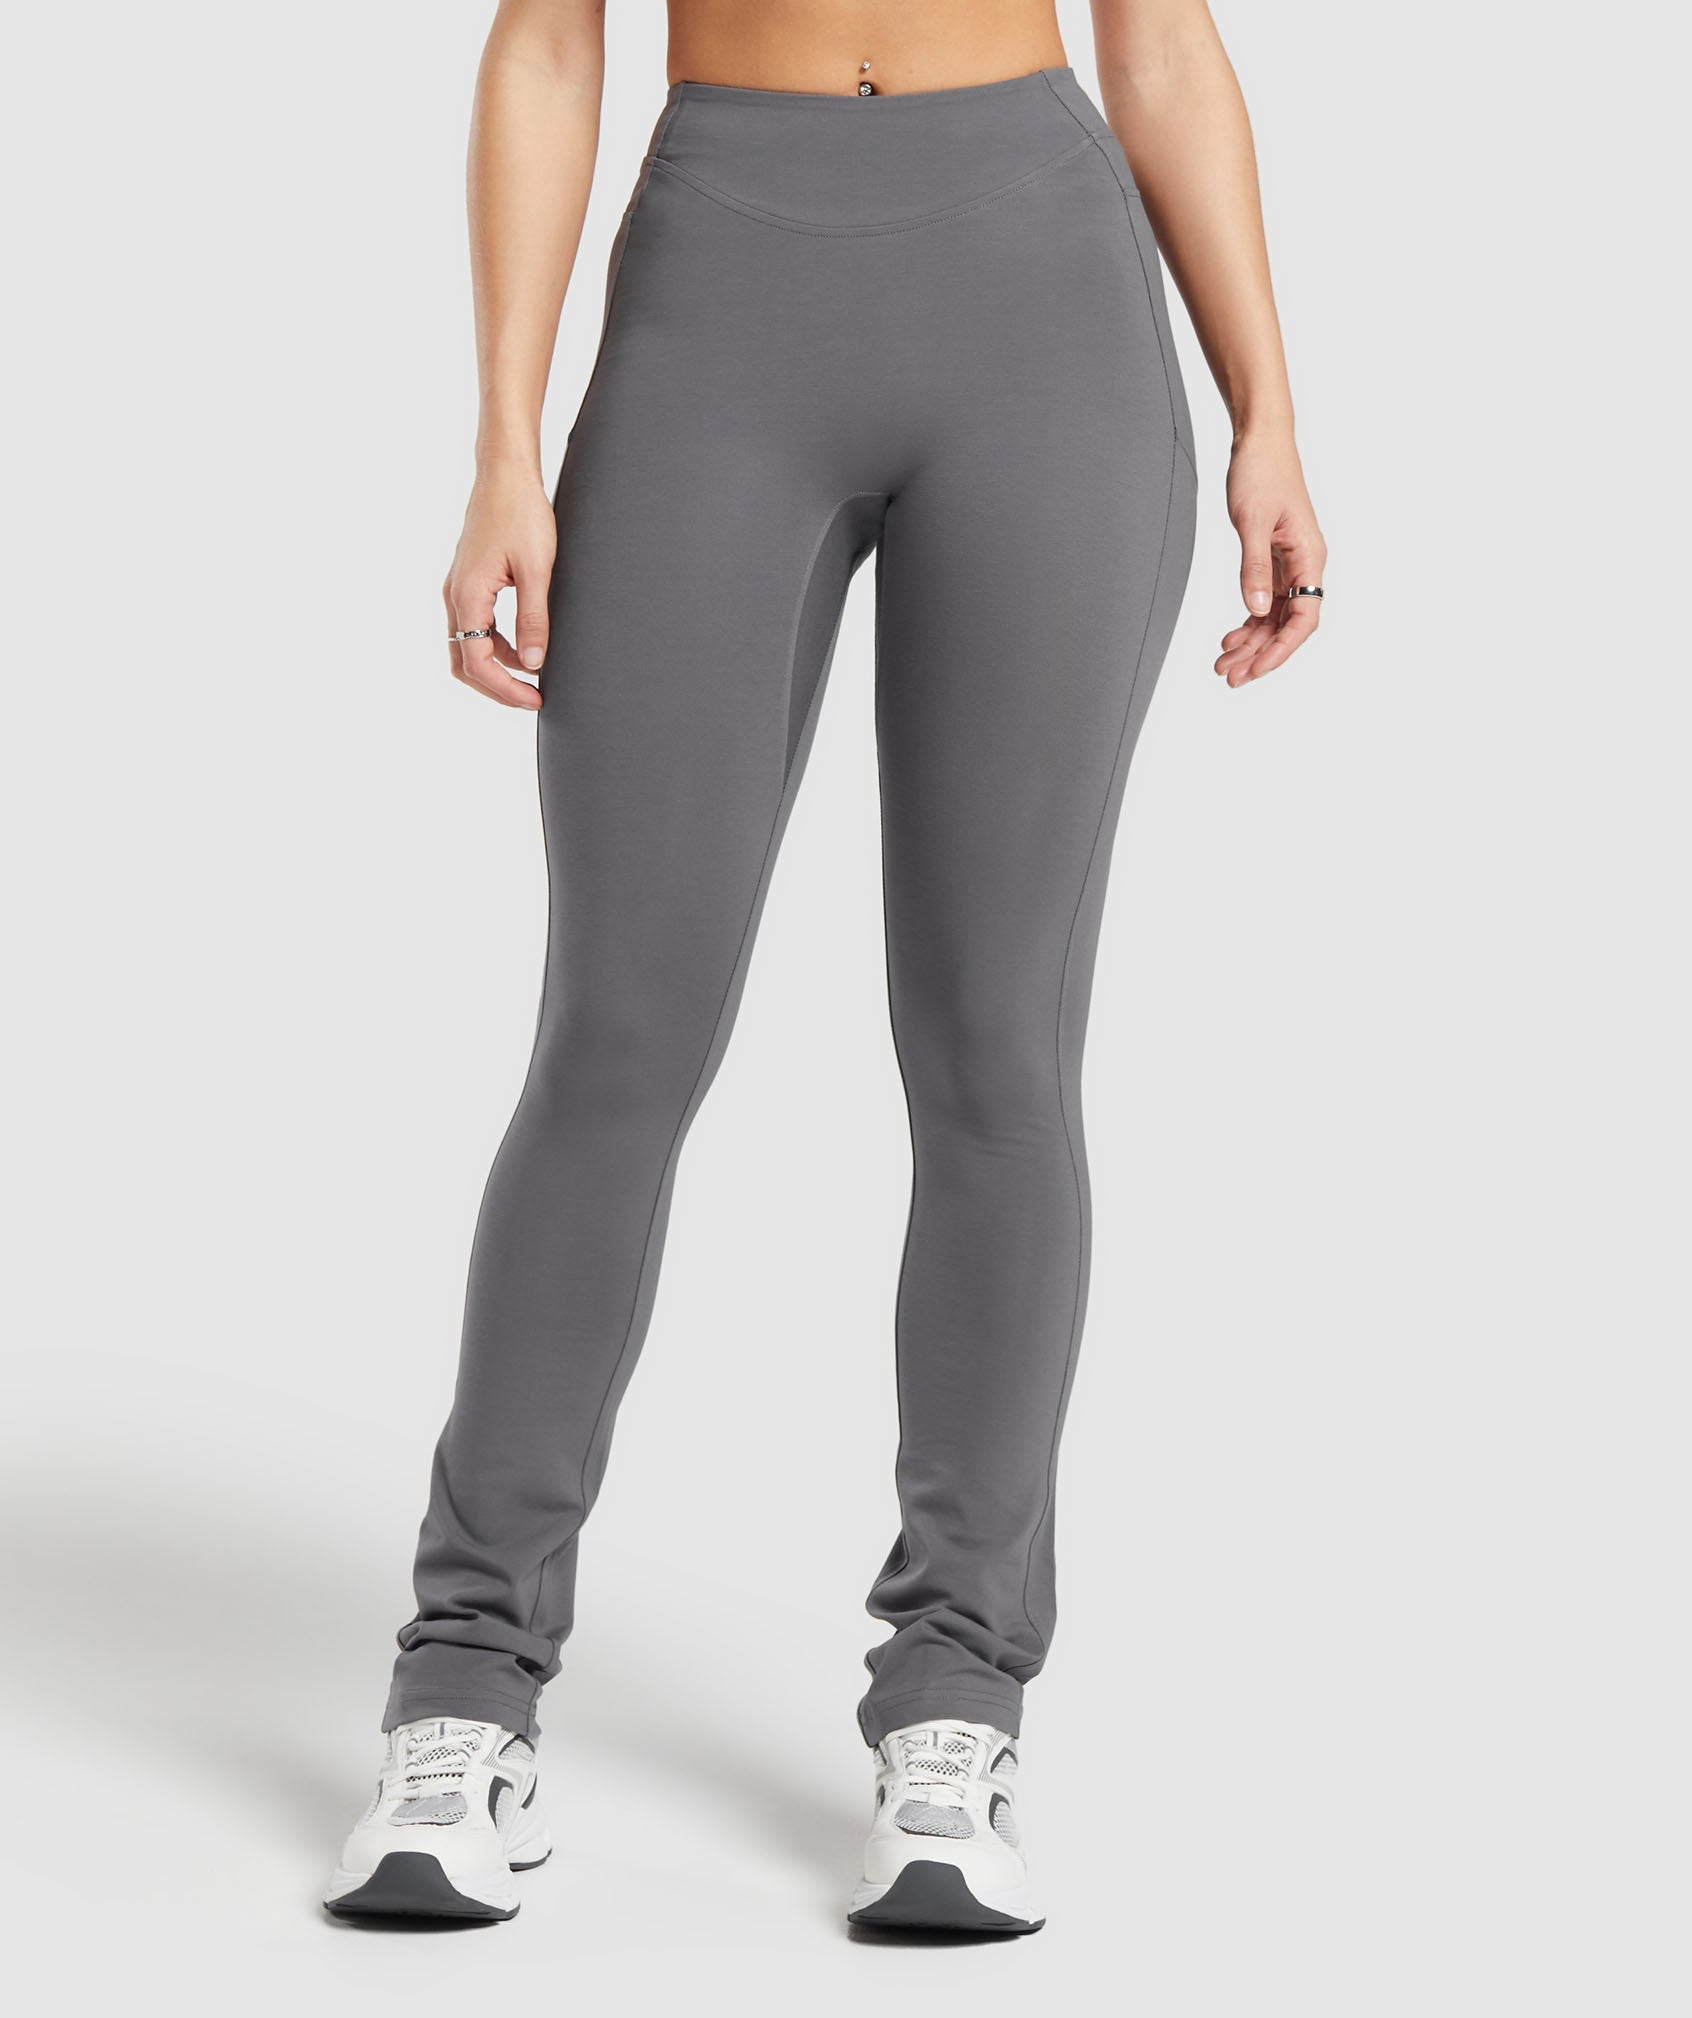 Rest Day Boot Cut Cotton Leggings in Brushed Grey